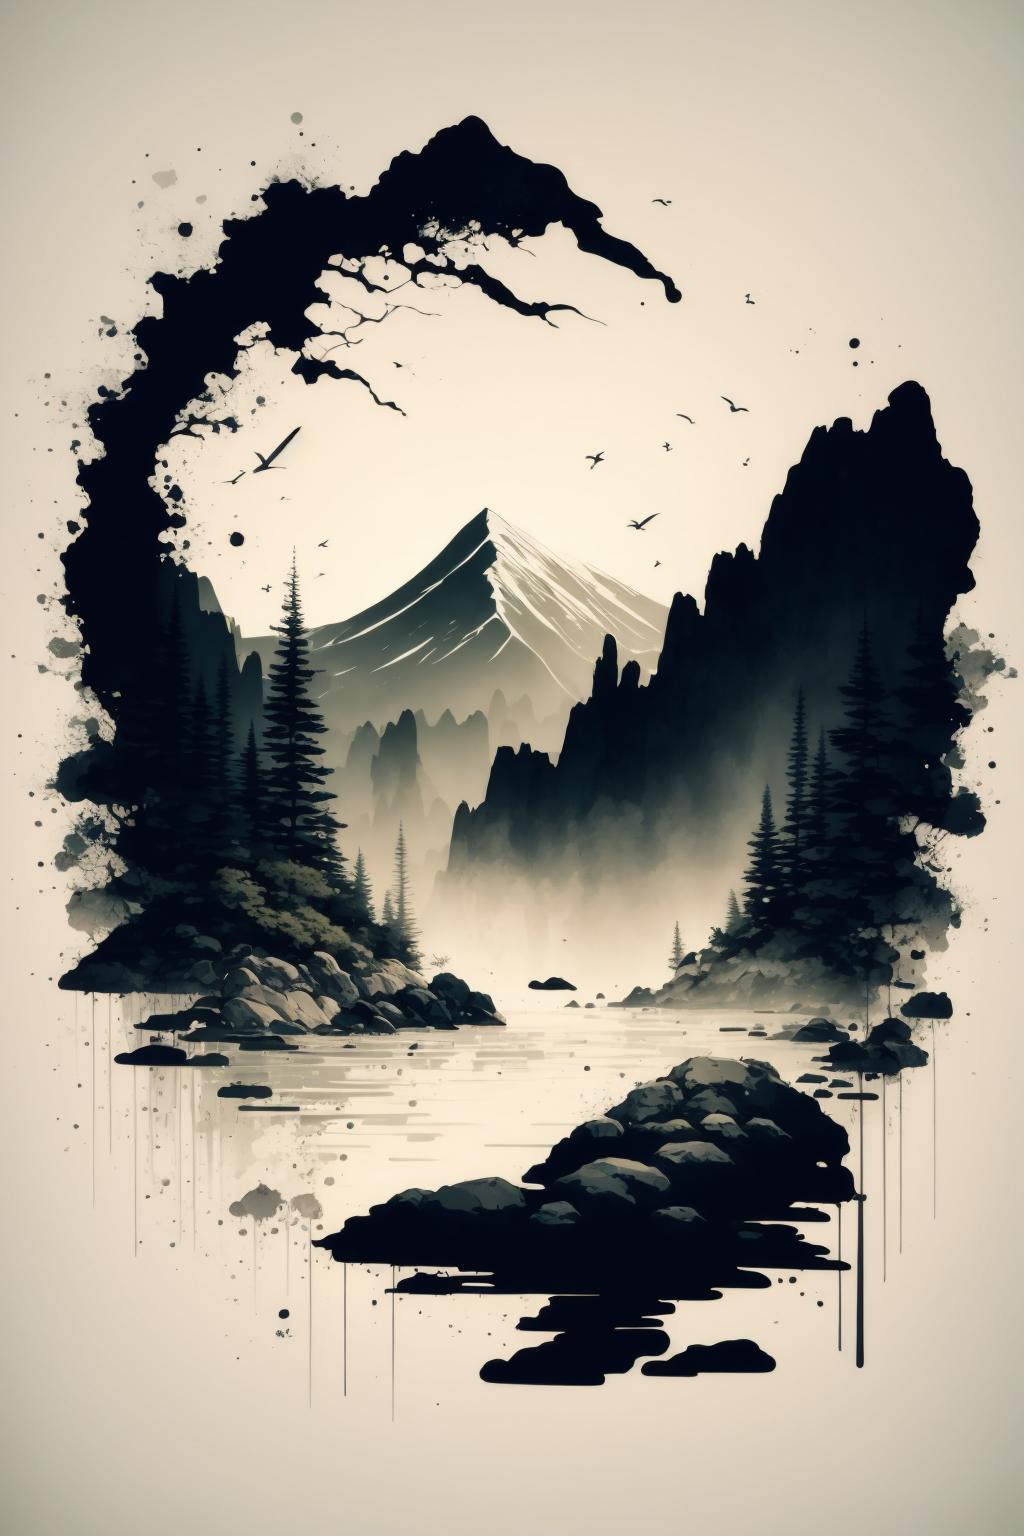 Ink scenery | 水墨山水 image by silvermoong